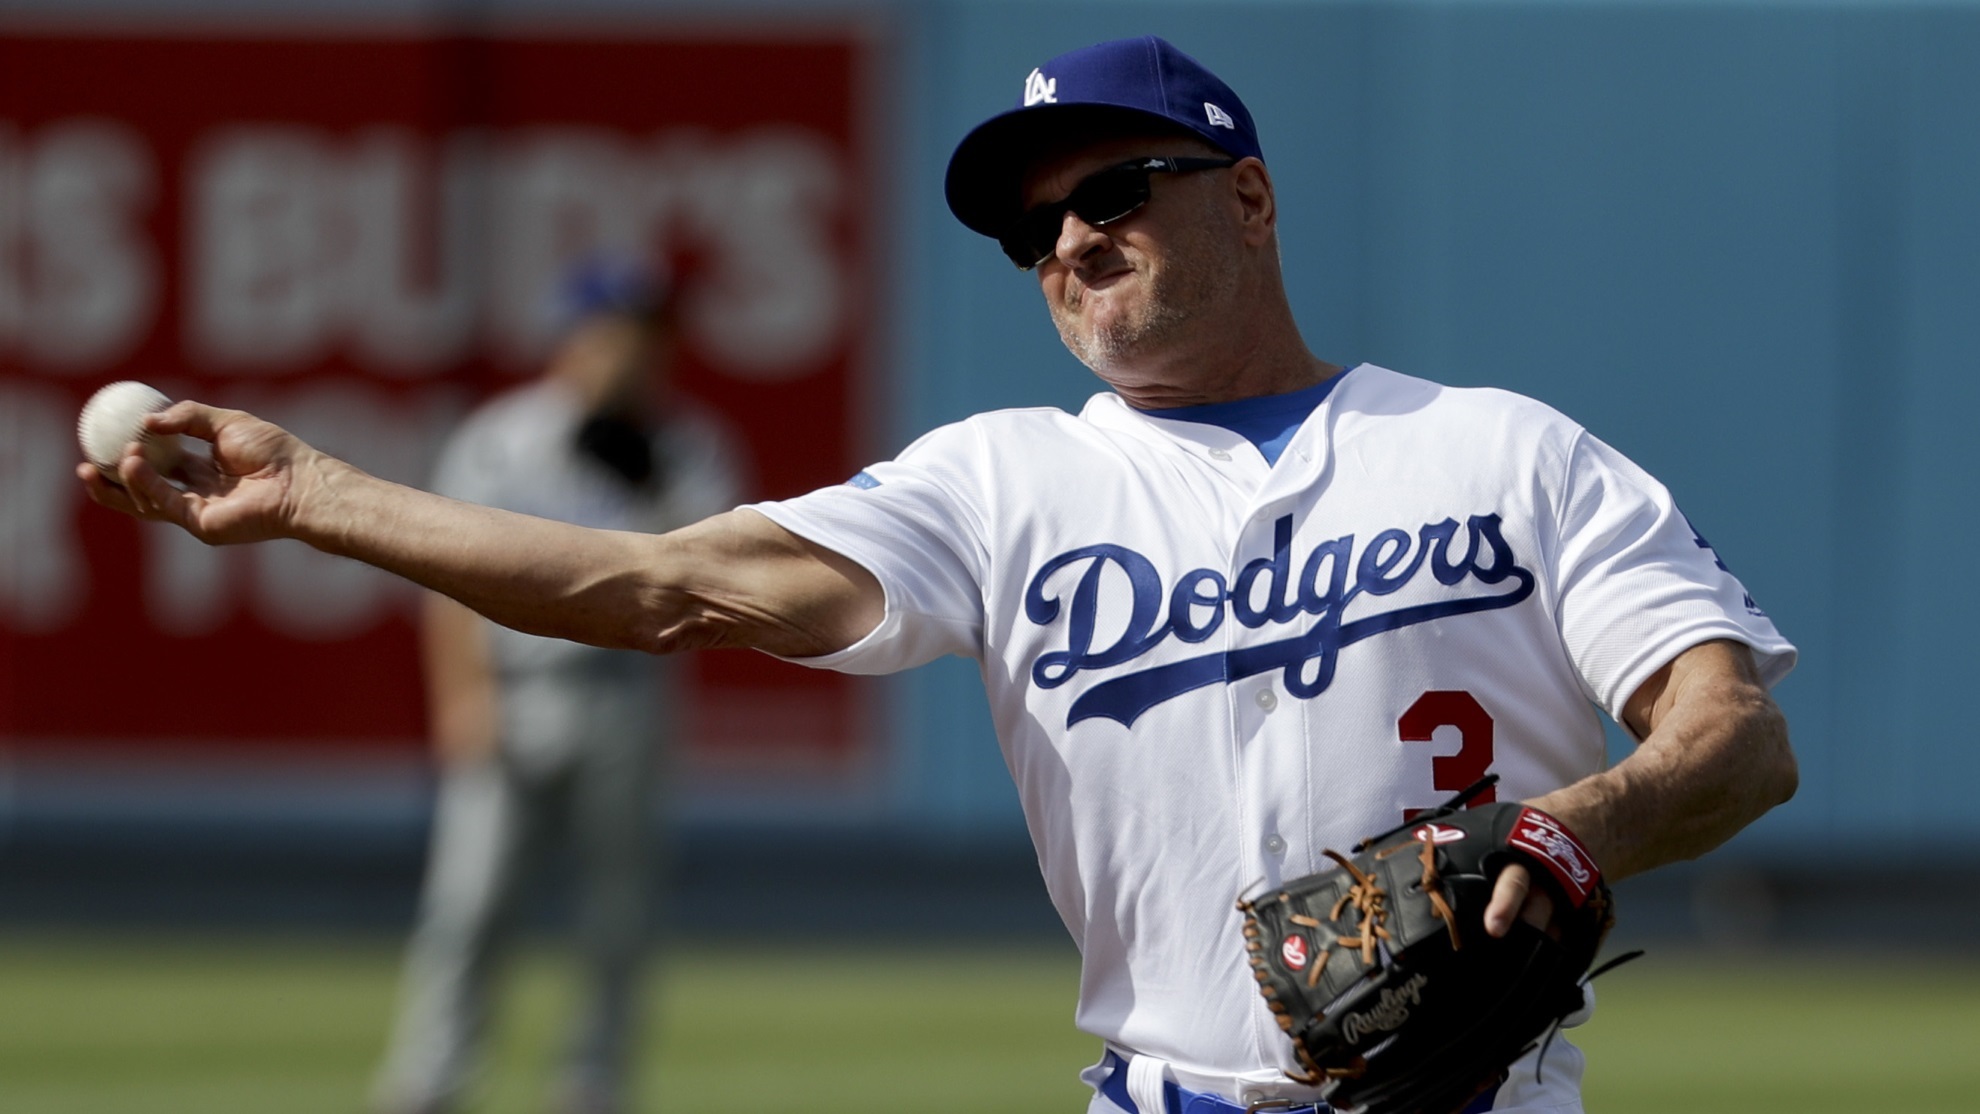 Former LA Dodger Steve Sax throws after fielding a ball during batting practice before an old-timers game.